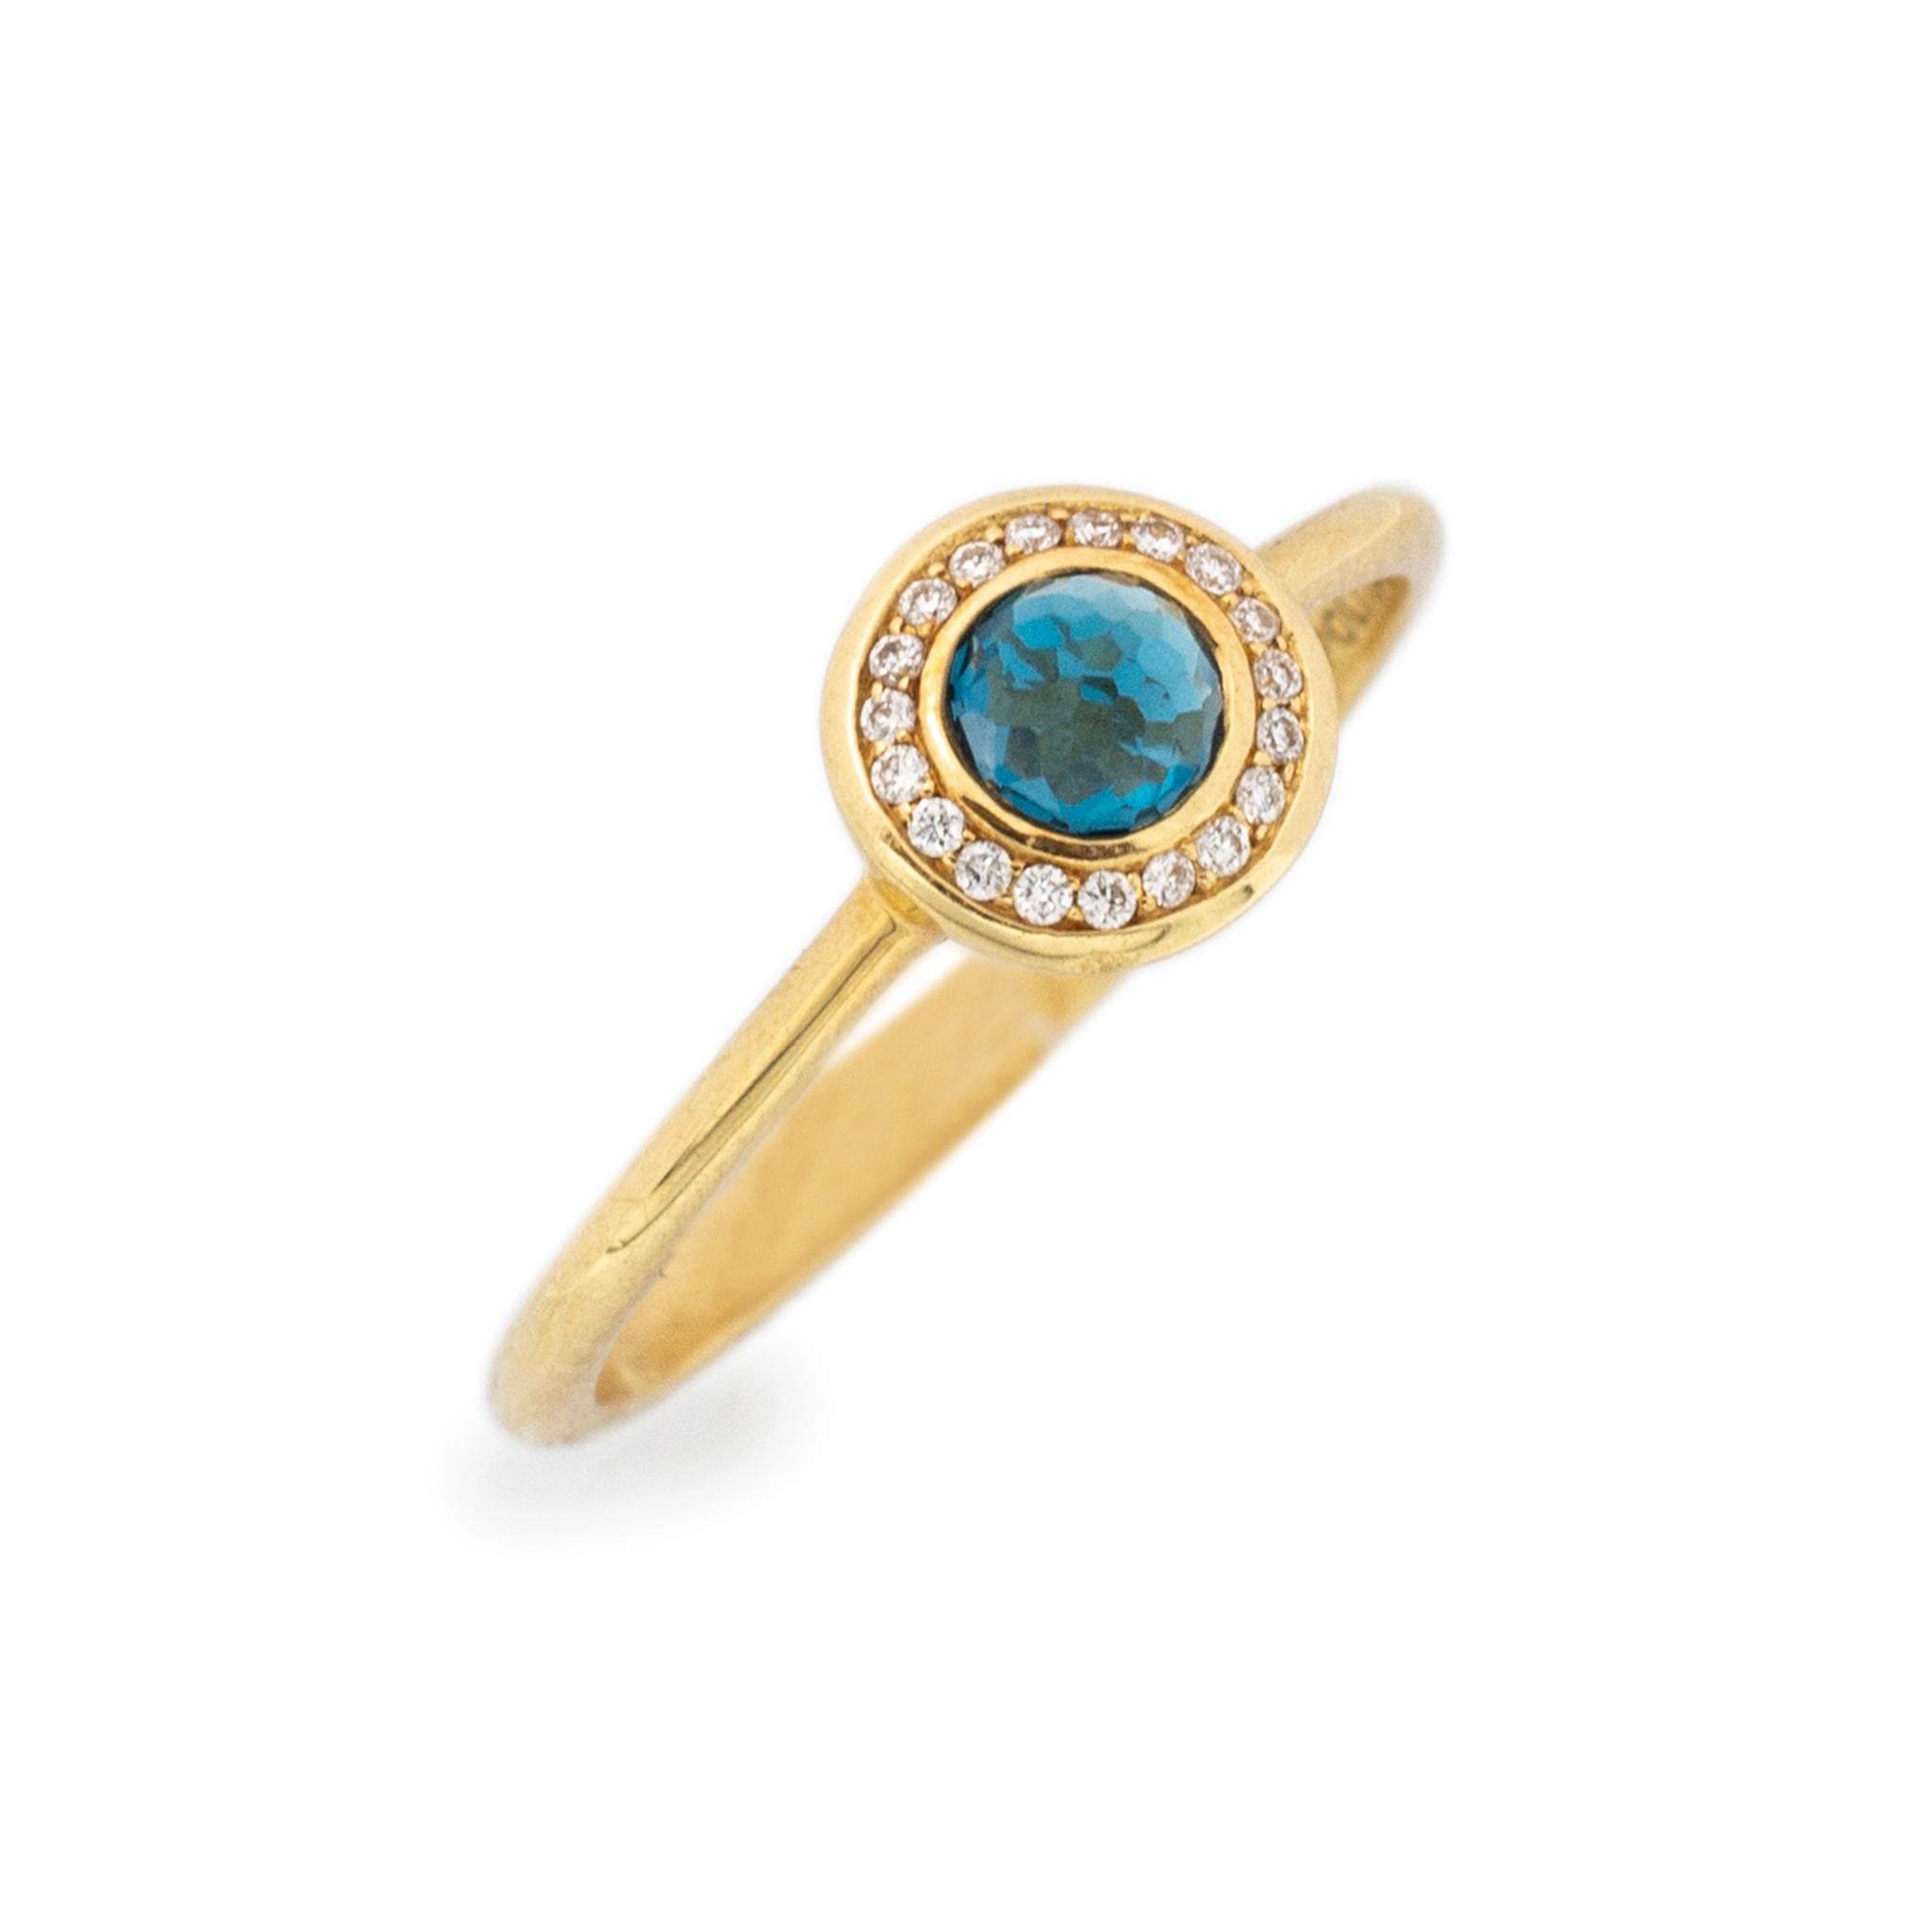 Brand: Ippolita

Gender: Ladies

Metal Type: 18K Yellow Gold

Size: 7

Shank Maximum Width: 1.75mm

Head Measurement: 7.30mm x 7.60mm

Weight: 2.30 grams

Ladies Ippolita 18K yellow gold diamond and blue topaz halo cocktail ring with a half round